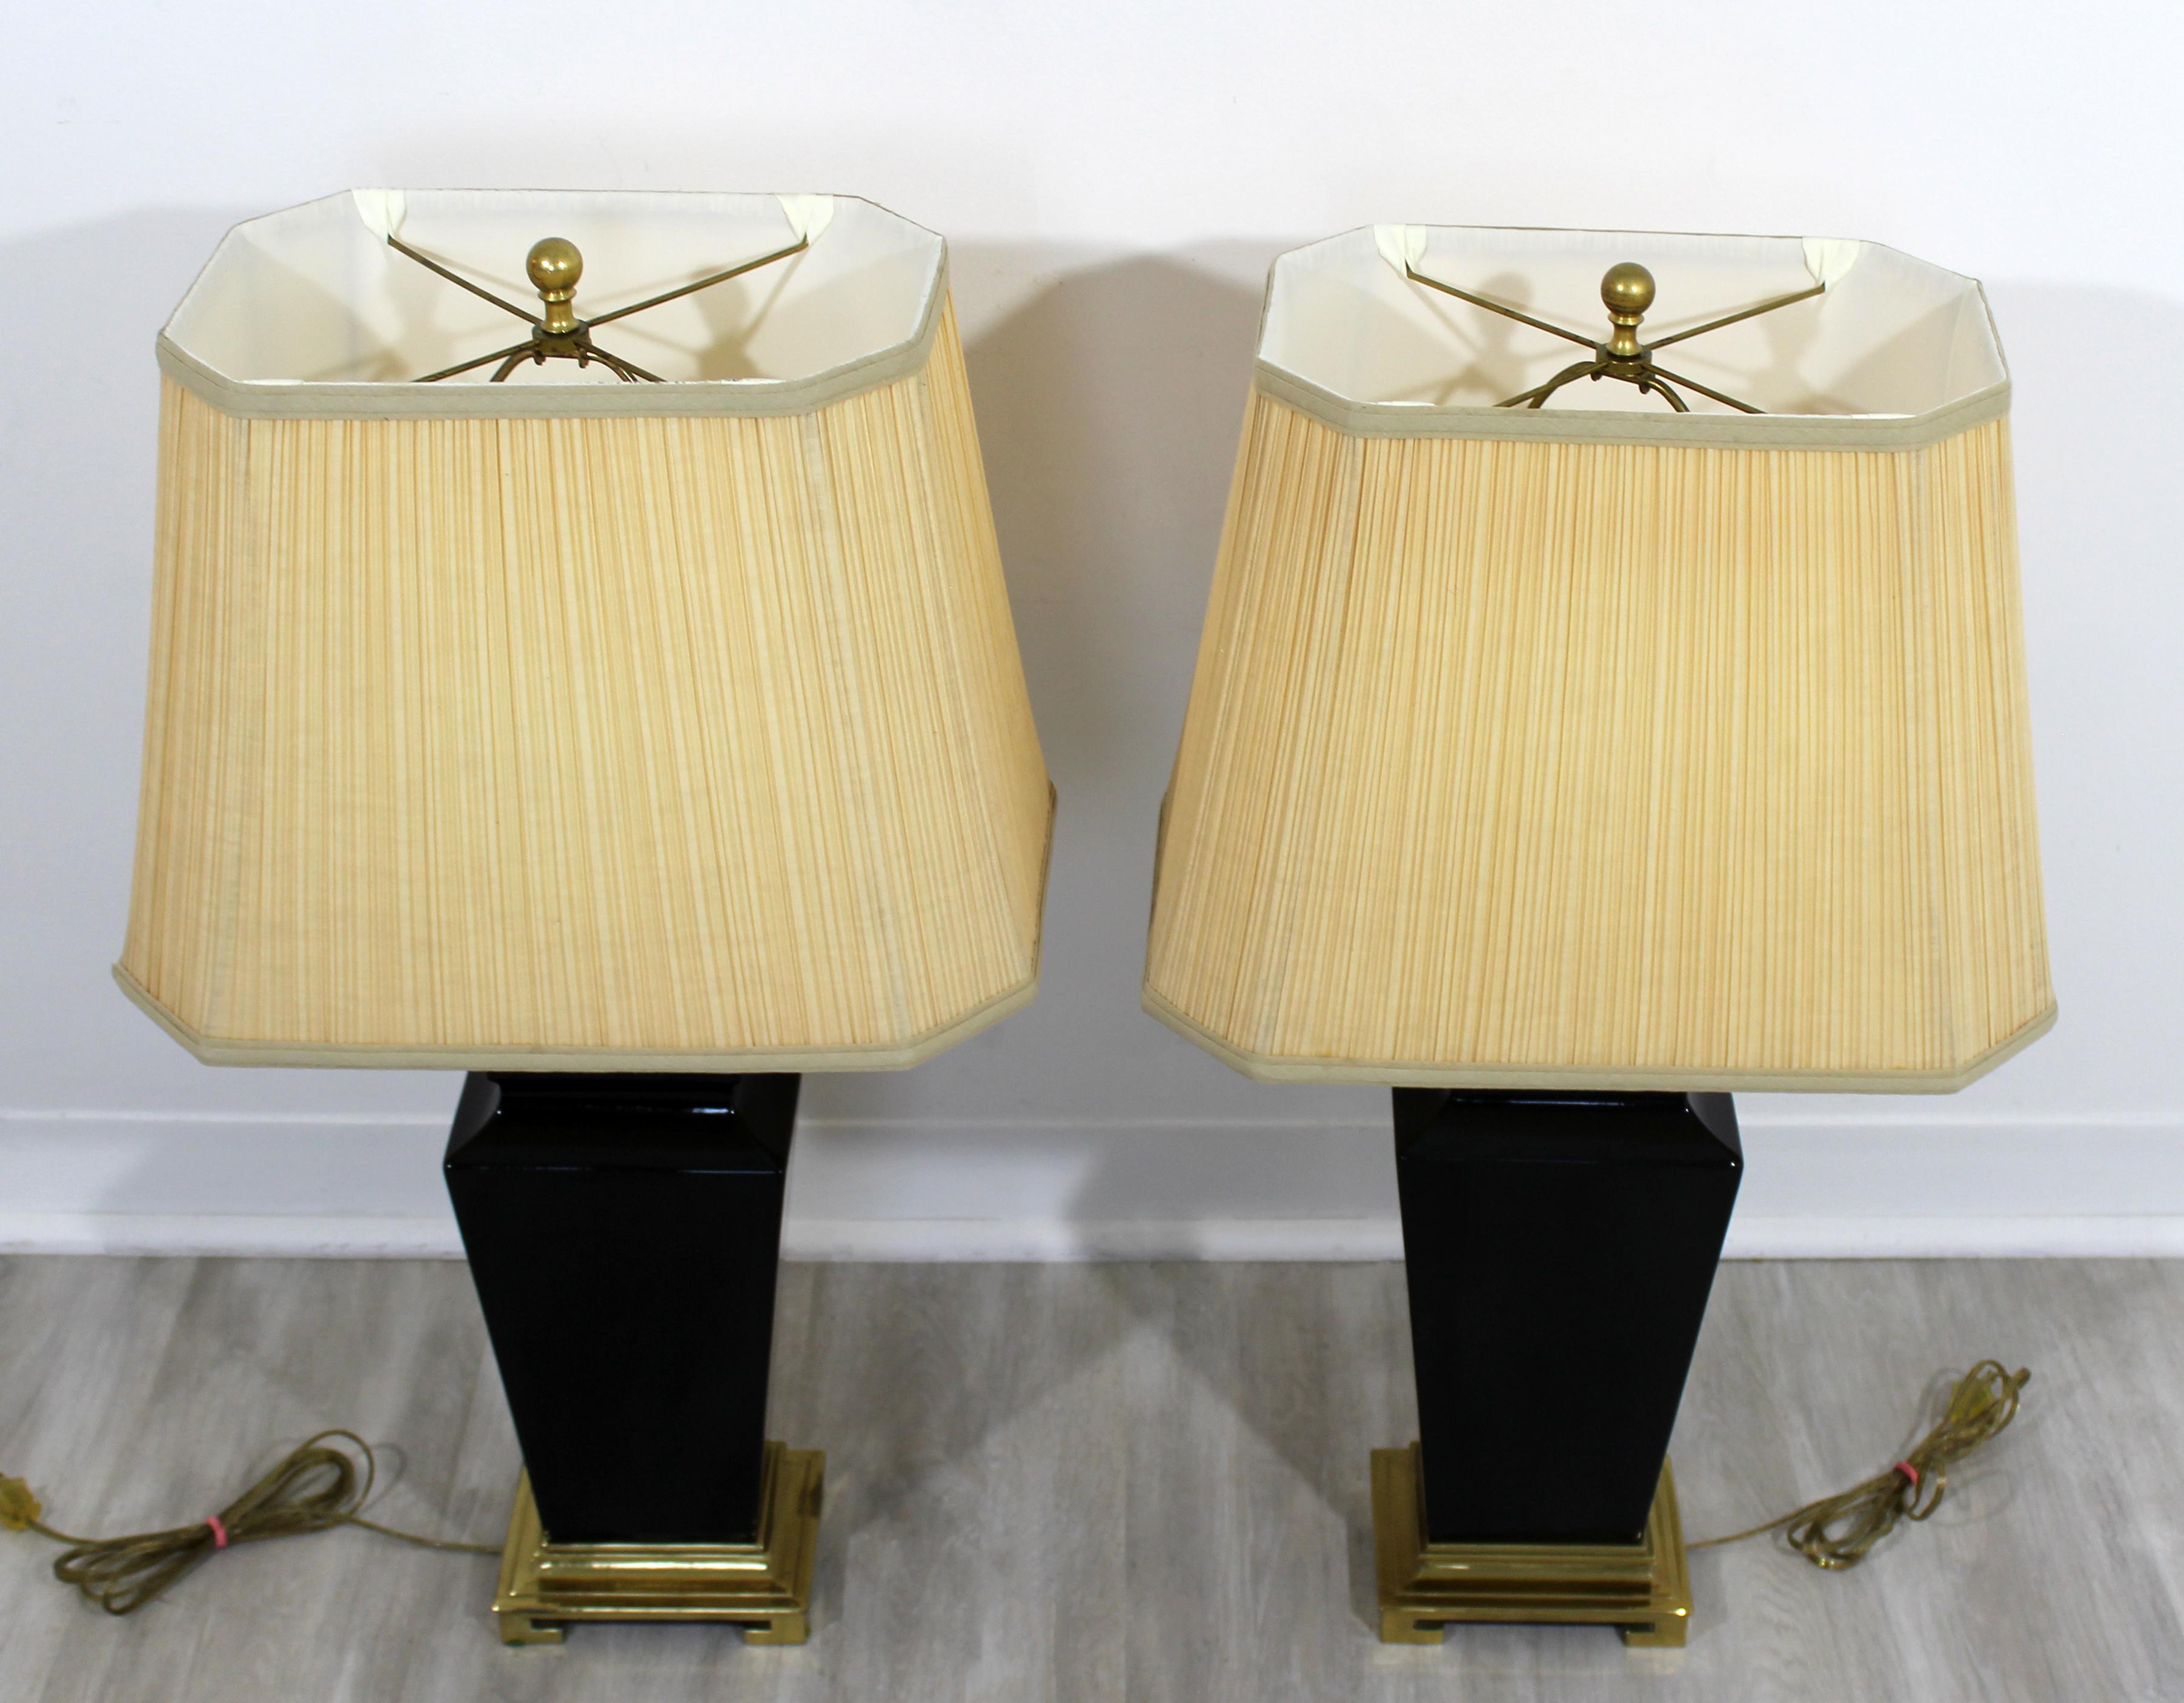 For your consideration is a fabulous pair of Hollywood Regency Asian ceramic table lamps, with original shades and finials, by Morris Greenspan, circa 1970s. In excellent vintage condition. The dimensions of the shades are 17